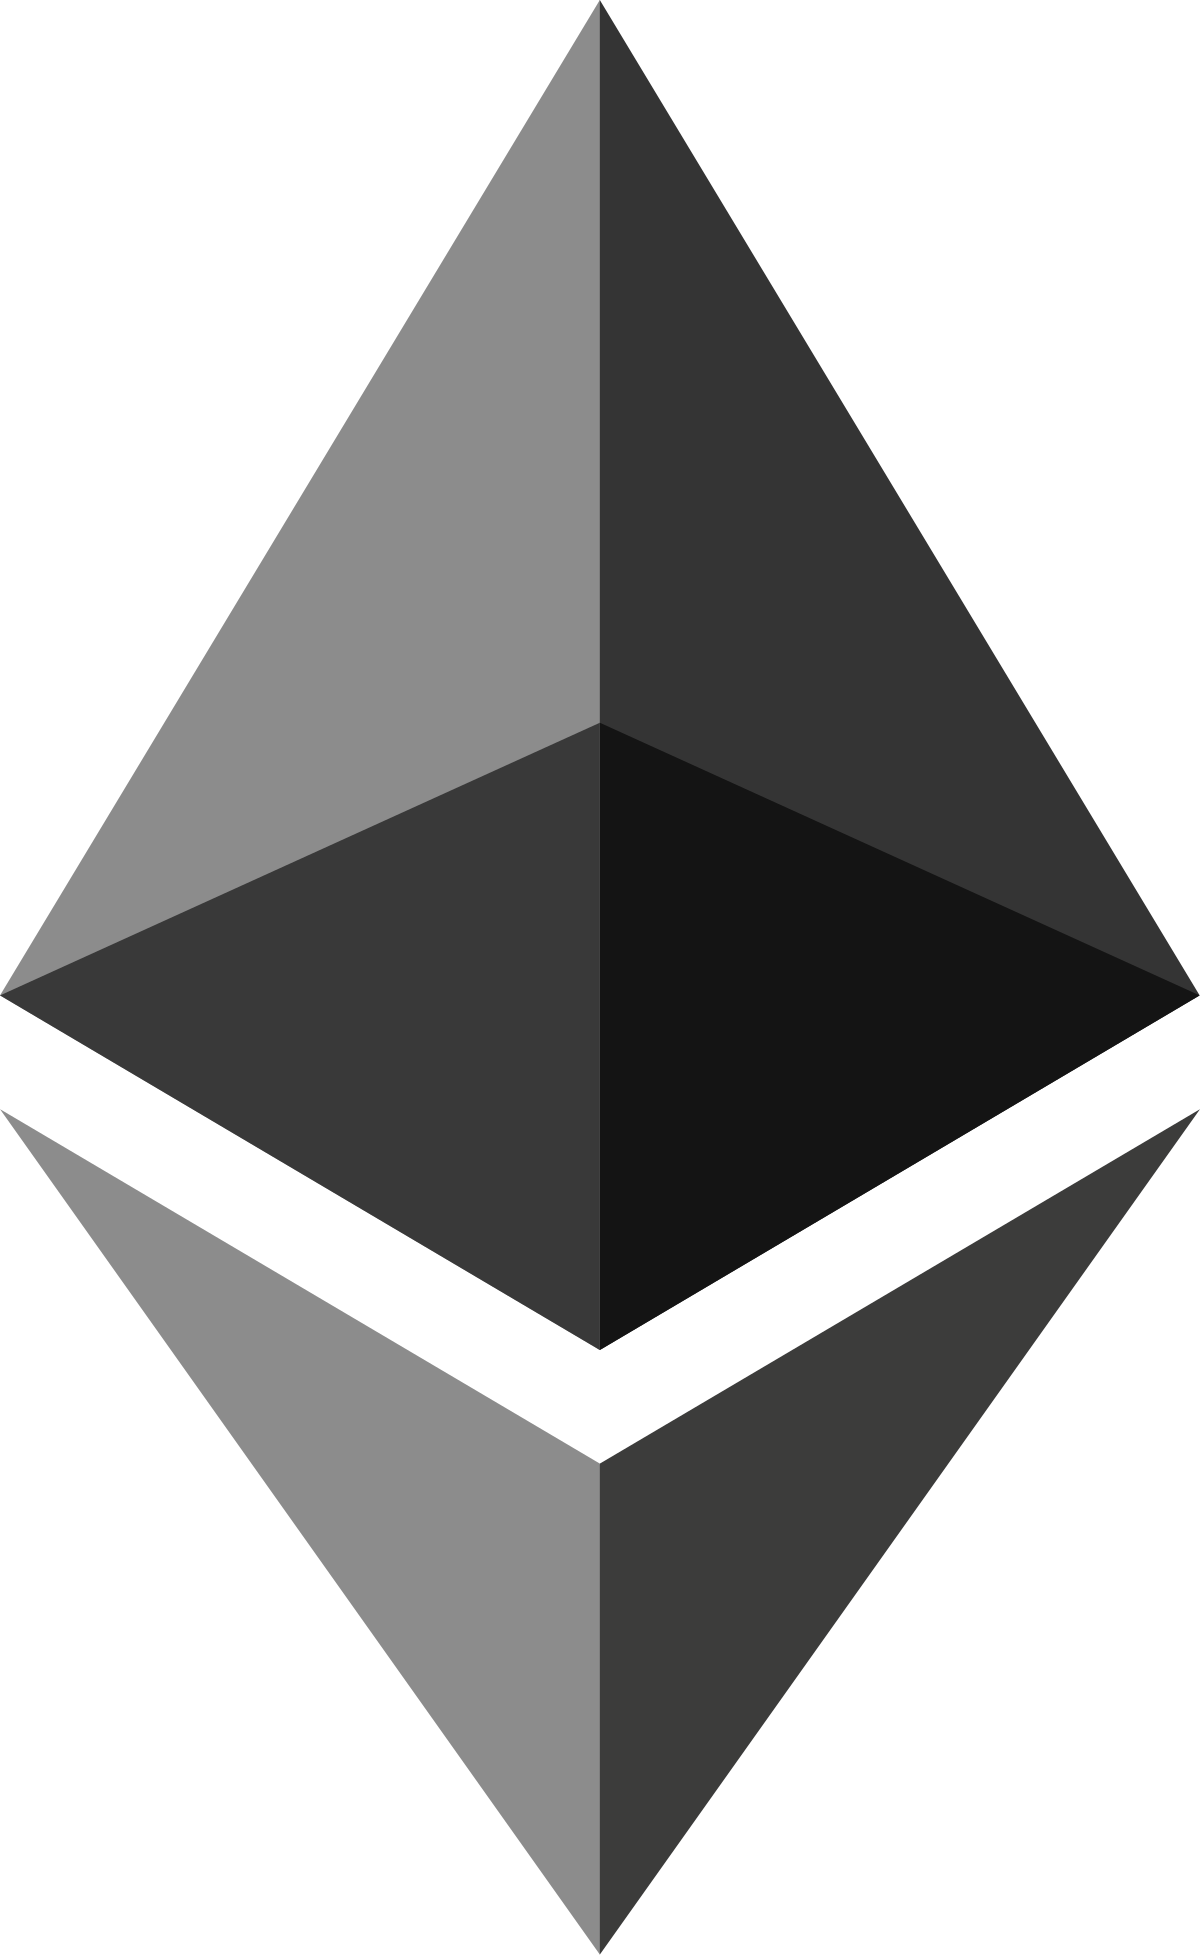 Blockchain Cryptocurrency Ethereum Logo Coin Stack PNG Image